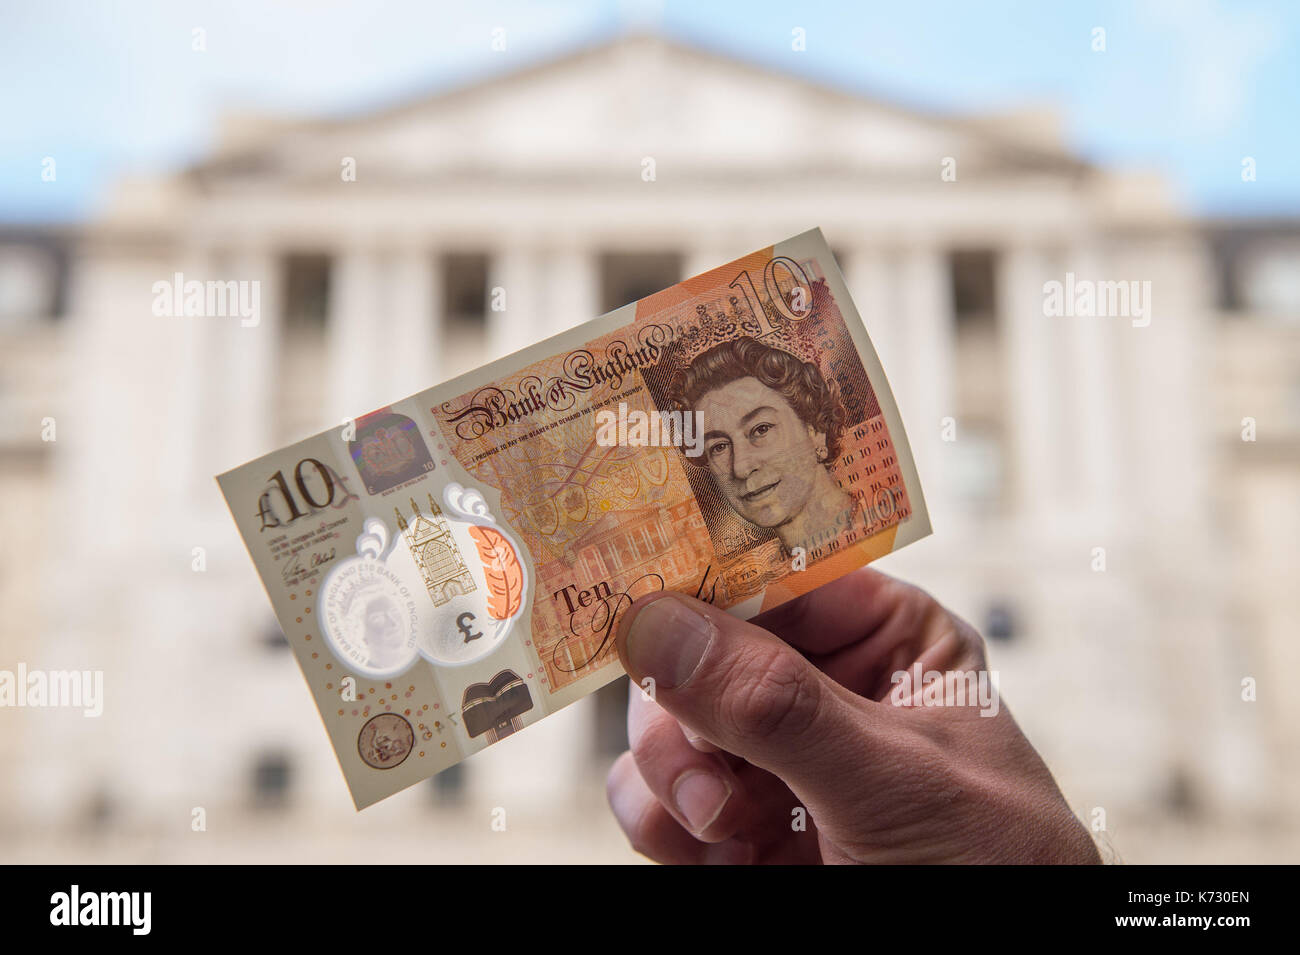 A man holds a new ten pound note featuring Jane Austen outside the Bank of England in London. Stock Photo